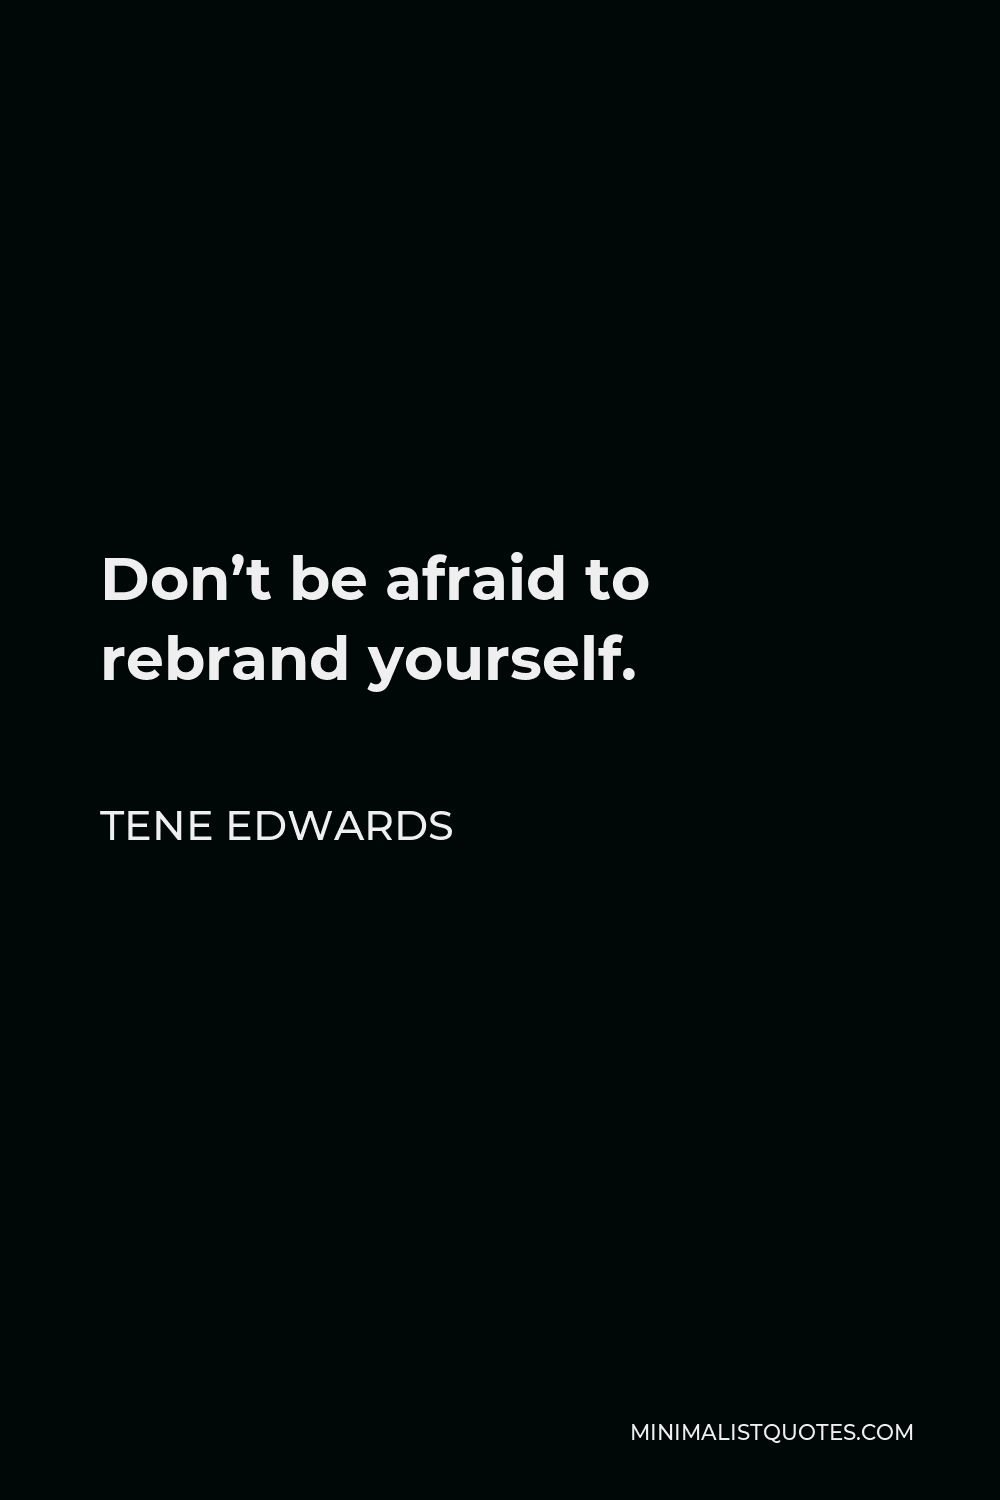 Tene Edwards Quote - Don’t be afraid to rebrand yourself.